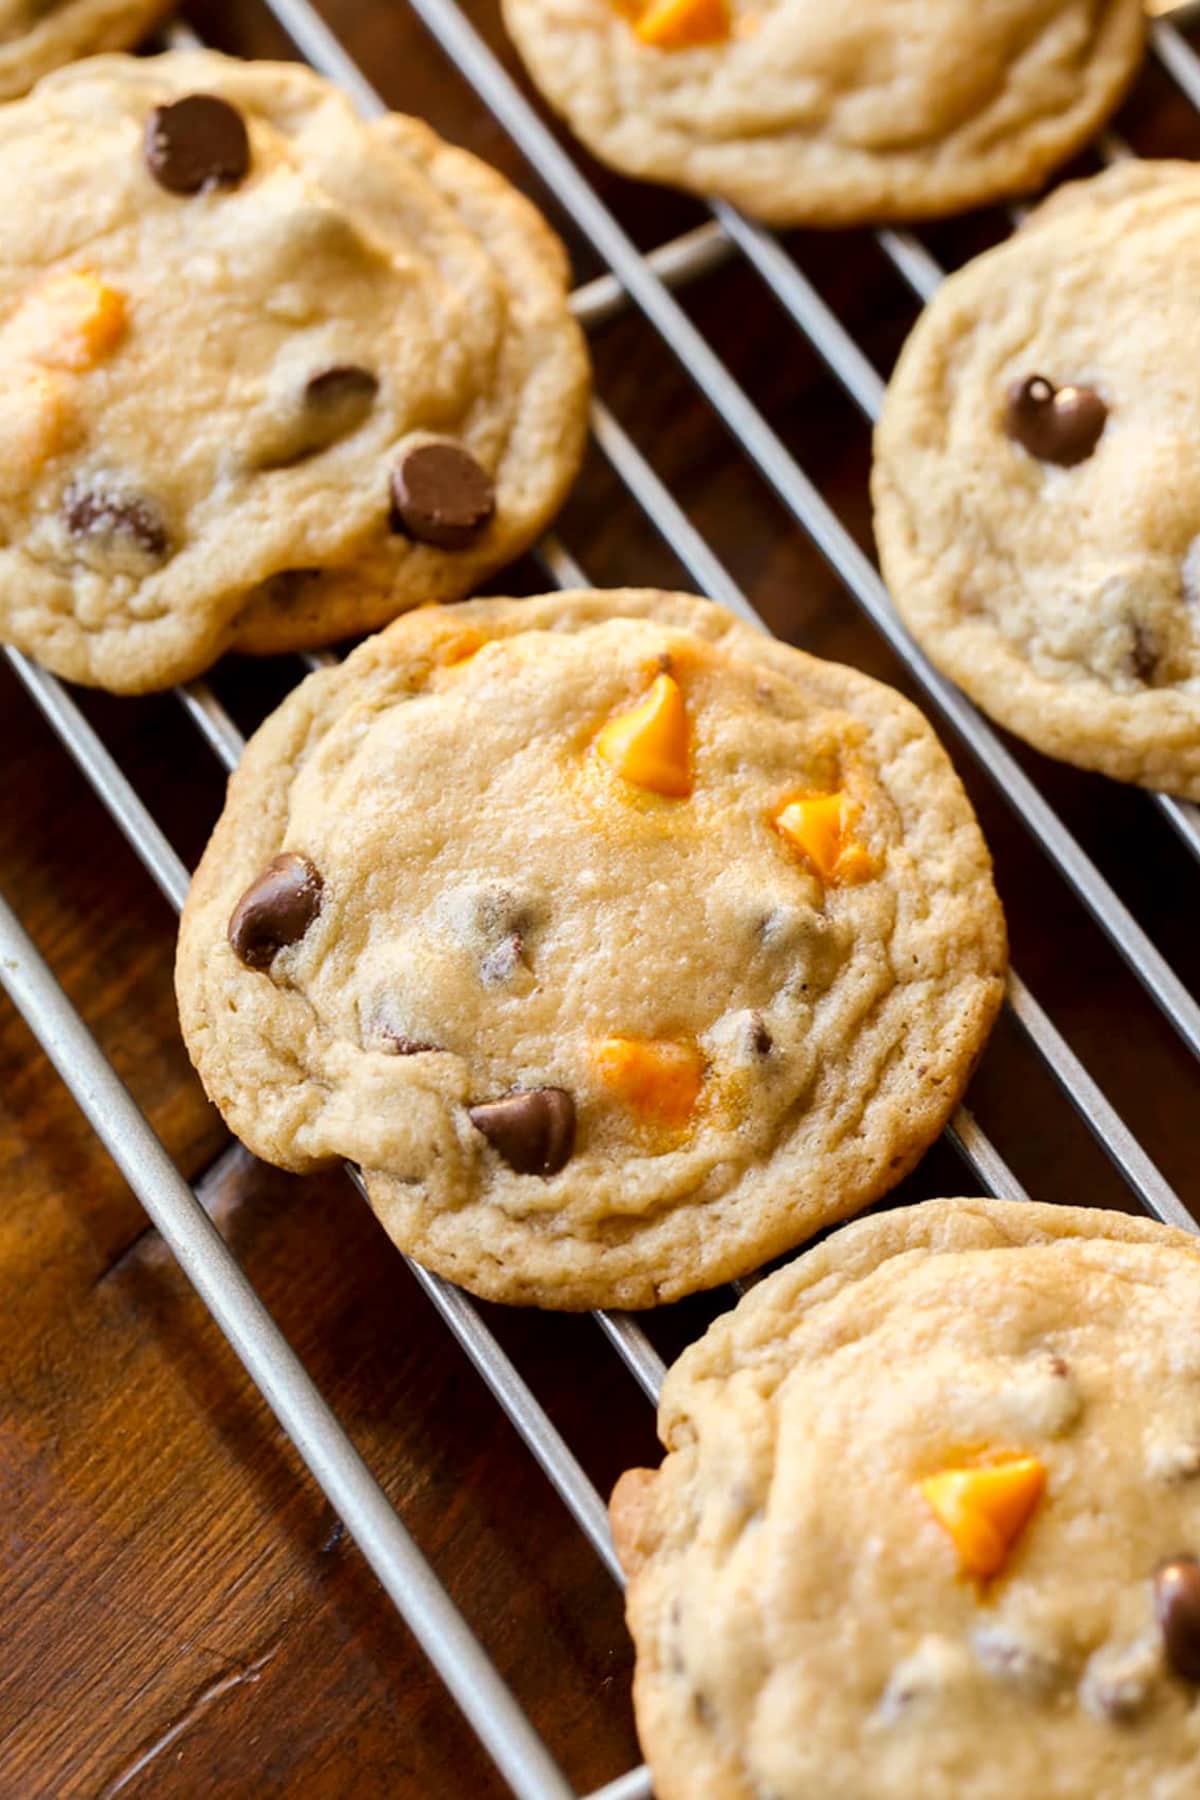 Cookies with brown and orange chips baked in on a wire cooling rack.